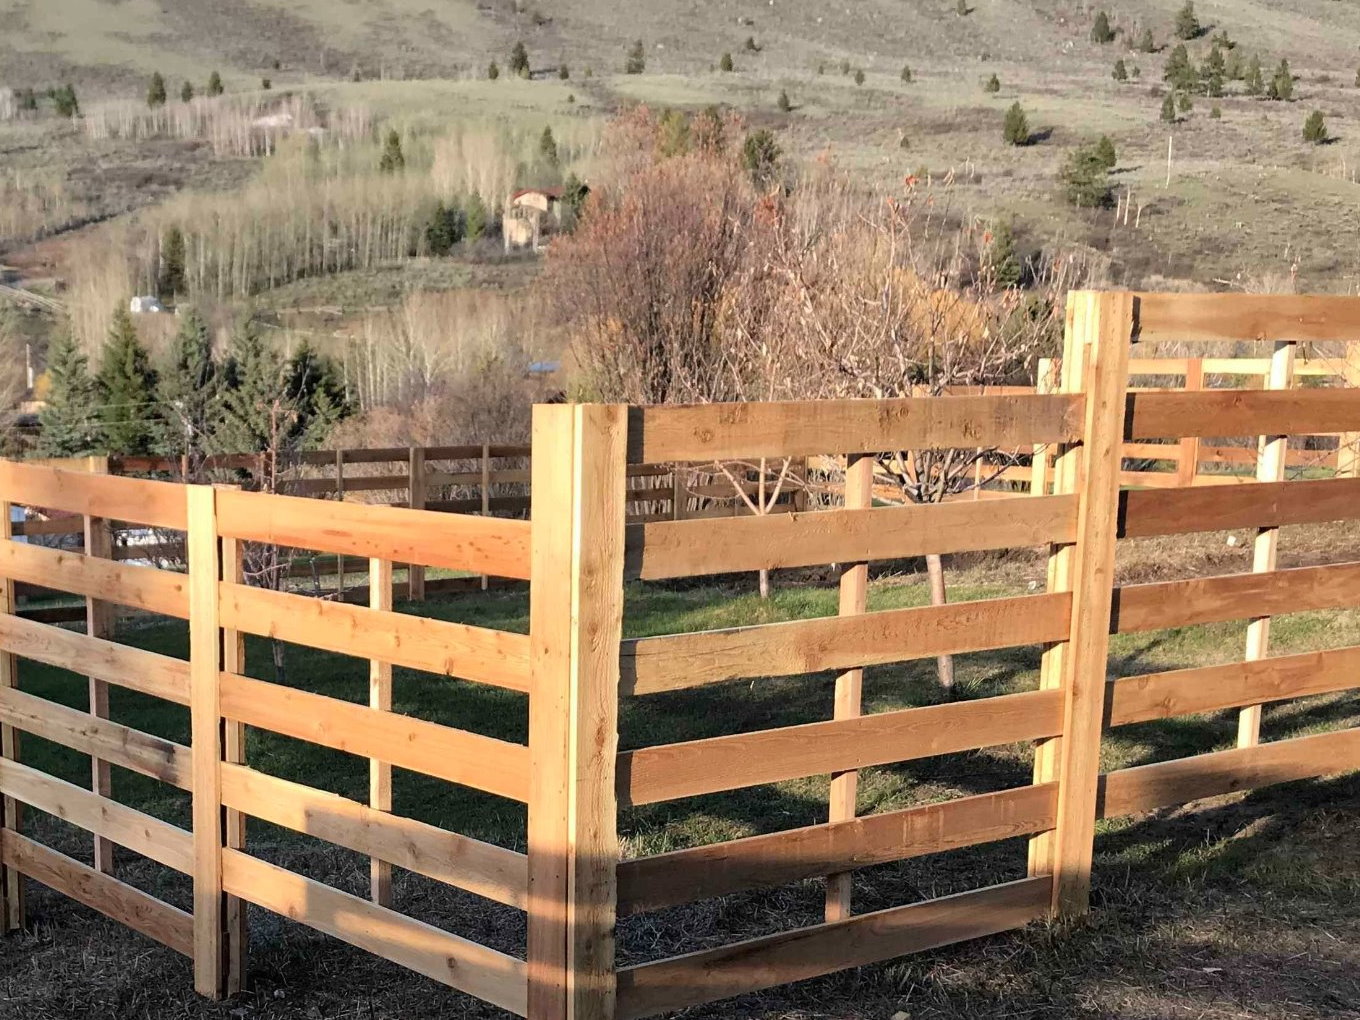 Pine Bluffs Wyoming Fence Project Photo